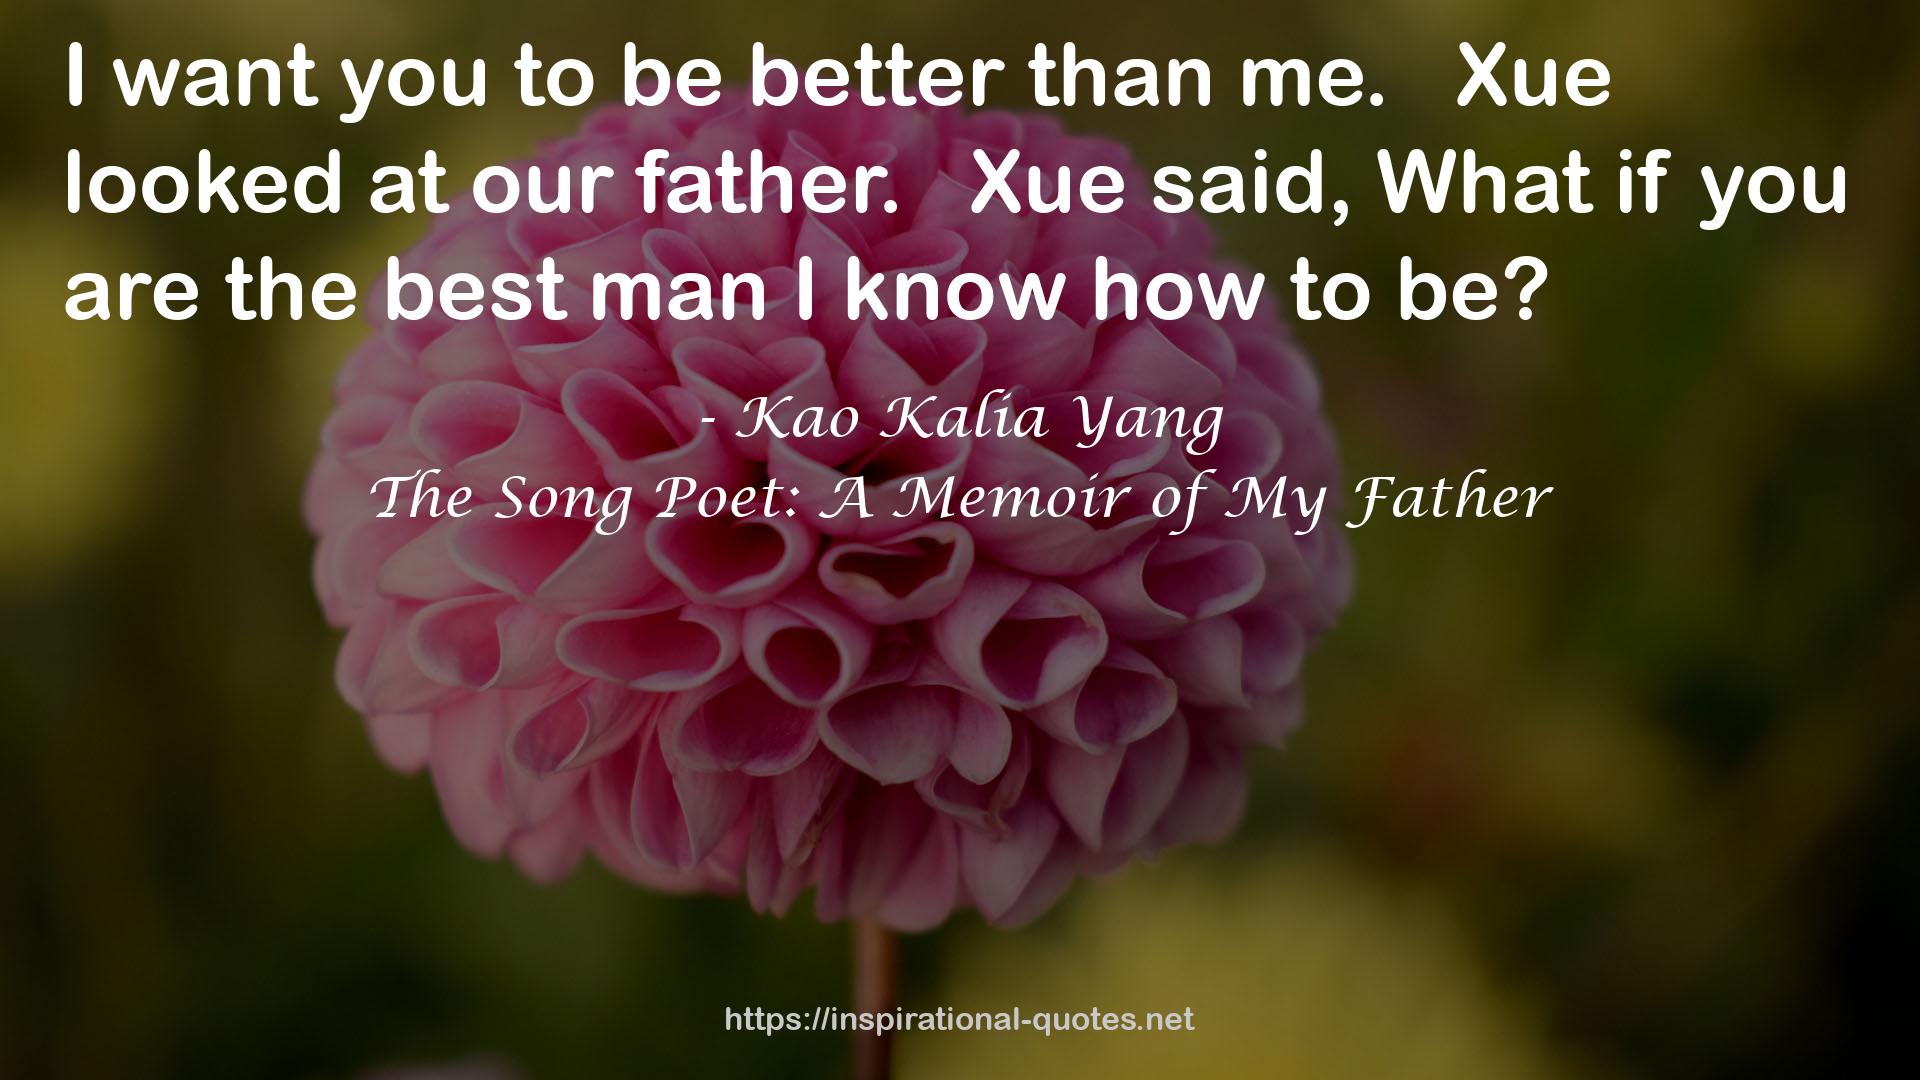 The Song Poet: A Memoir of My Father QUOTES